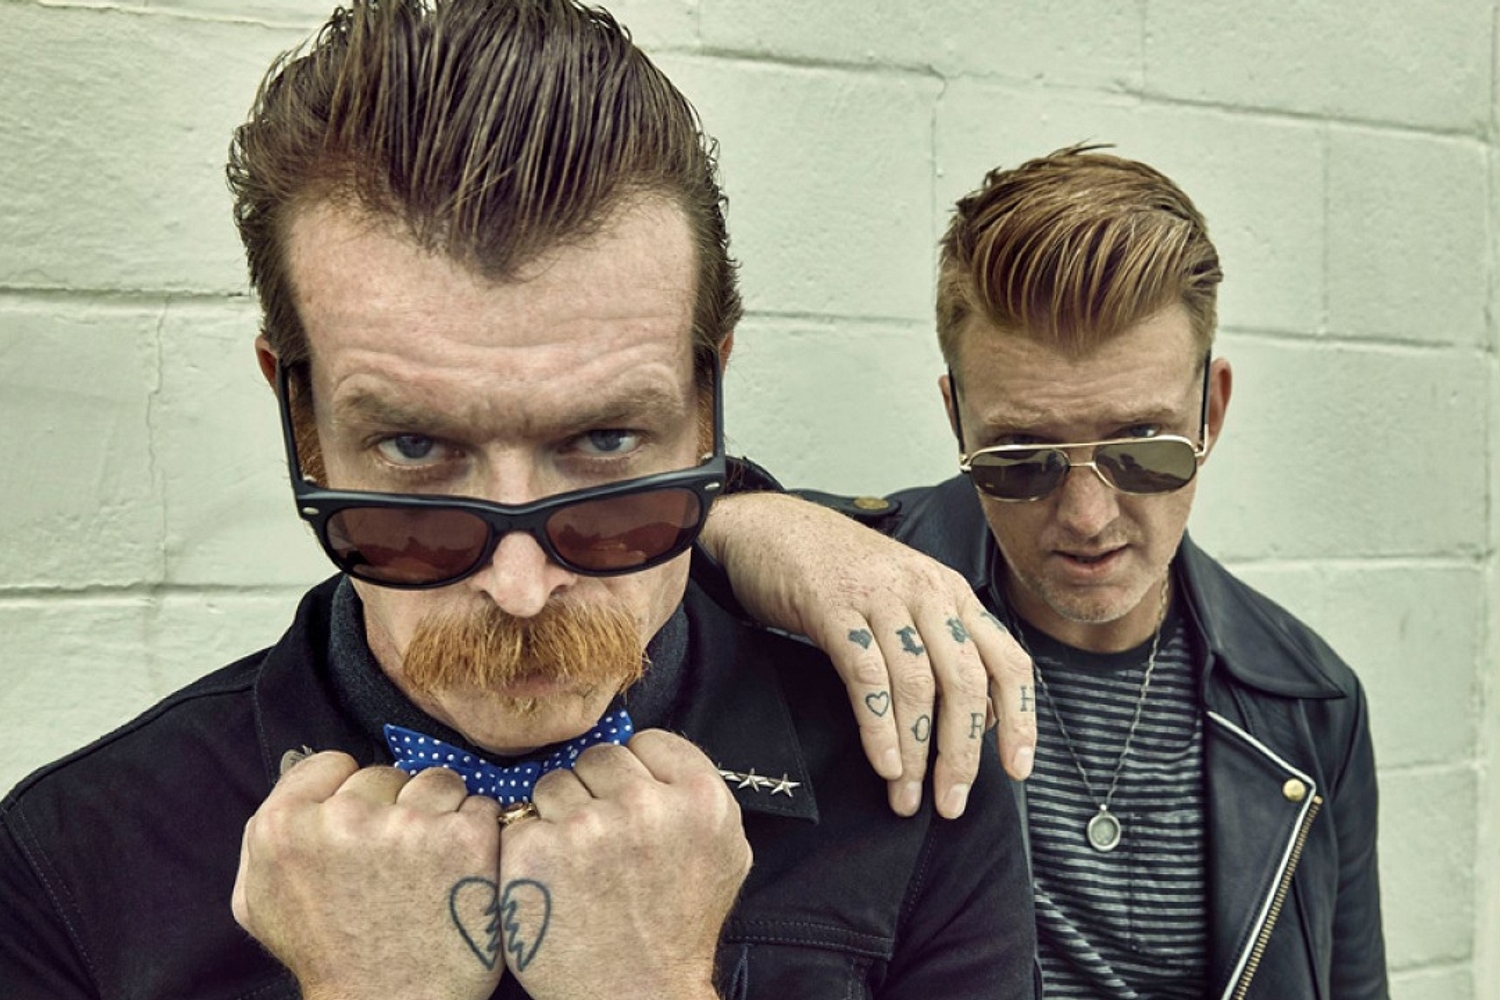 Eagles of Death Metal return to Le Bataclan to pay tribute to victims